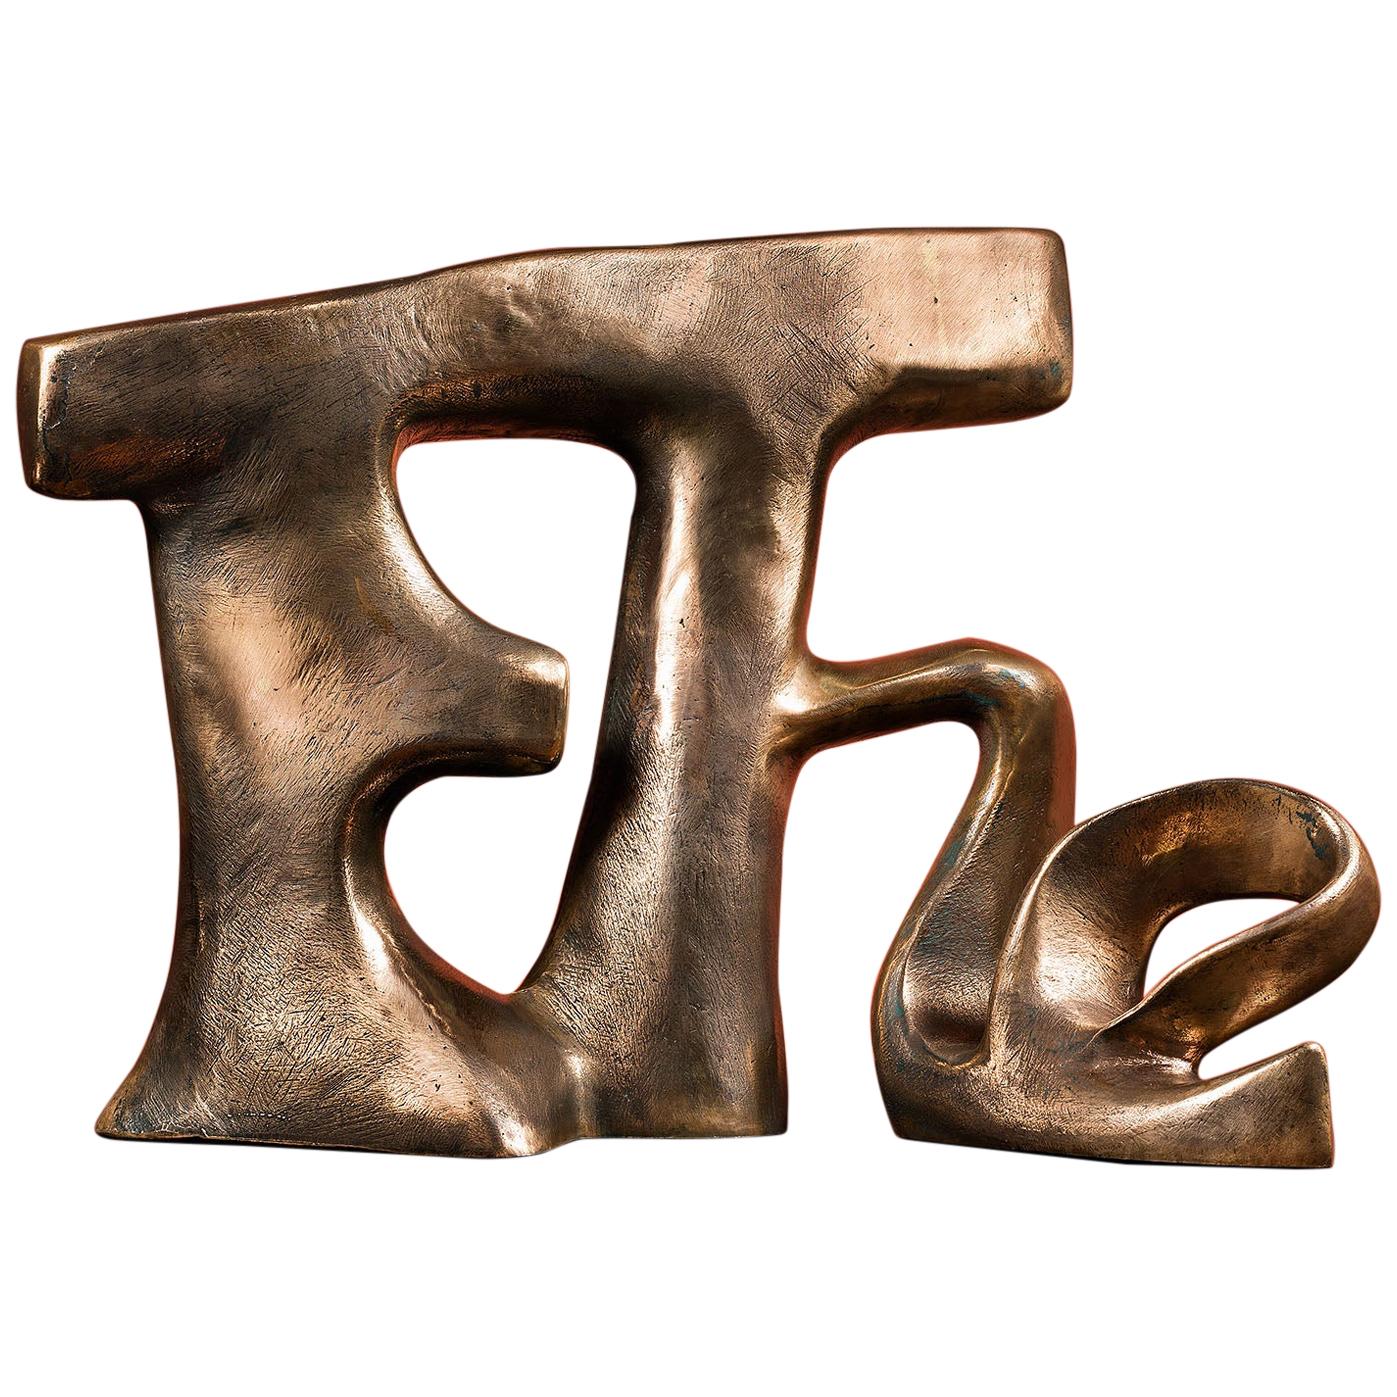 Bronze sculpture "Etre" 'to be' 1995, by Catherine Val